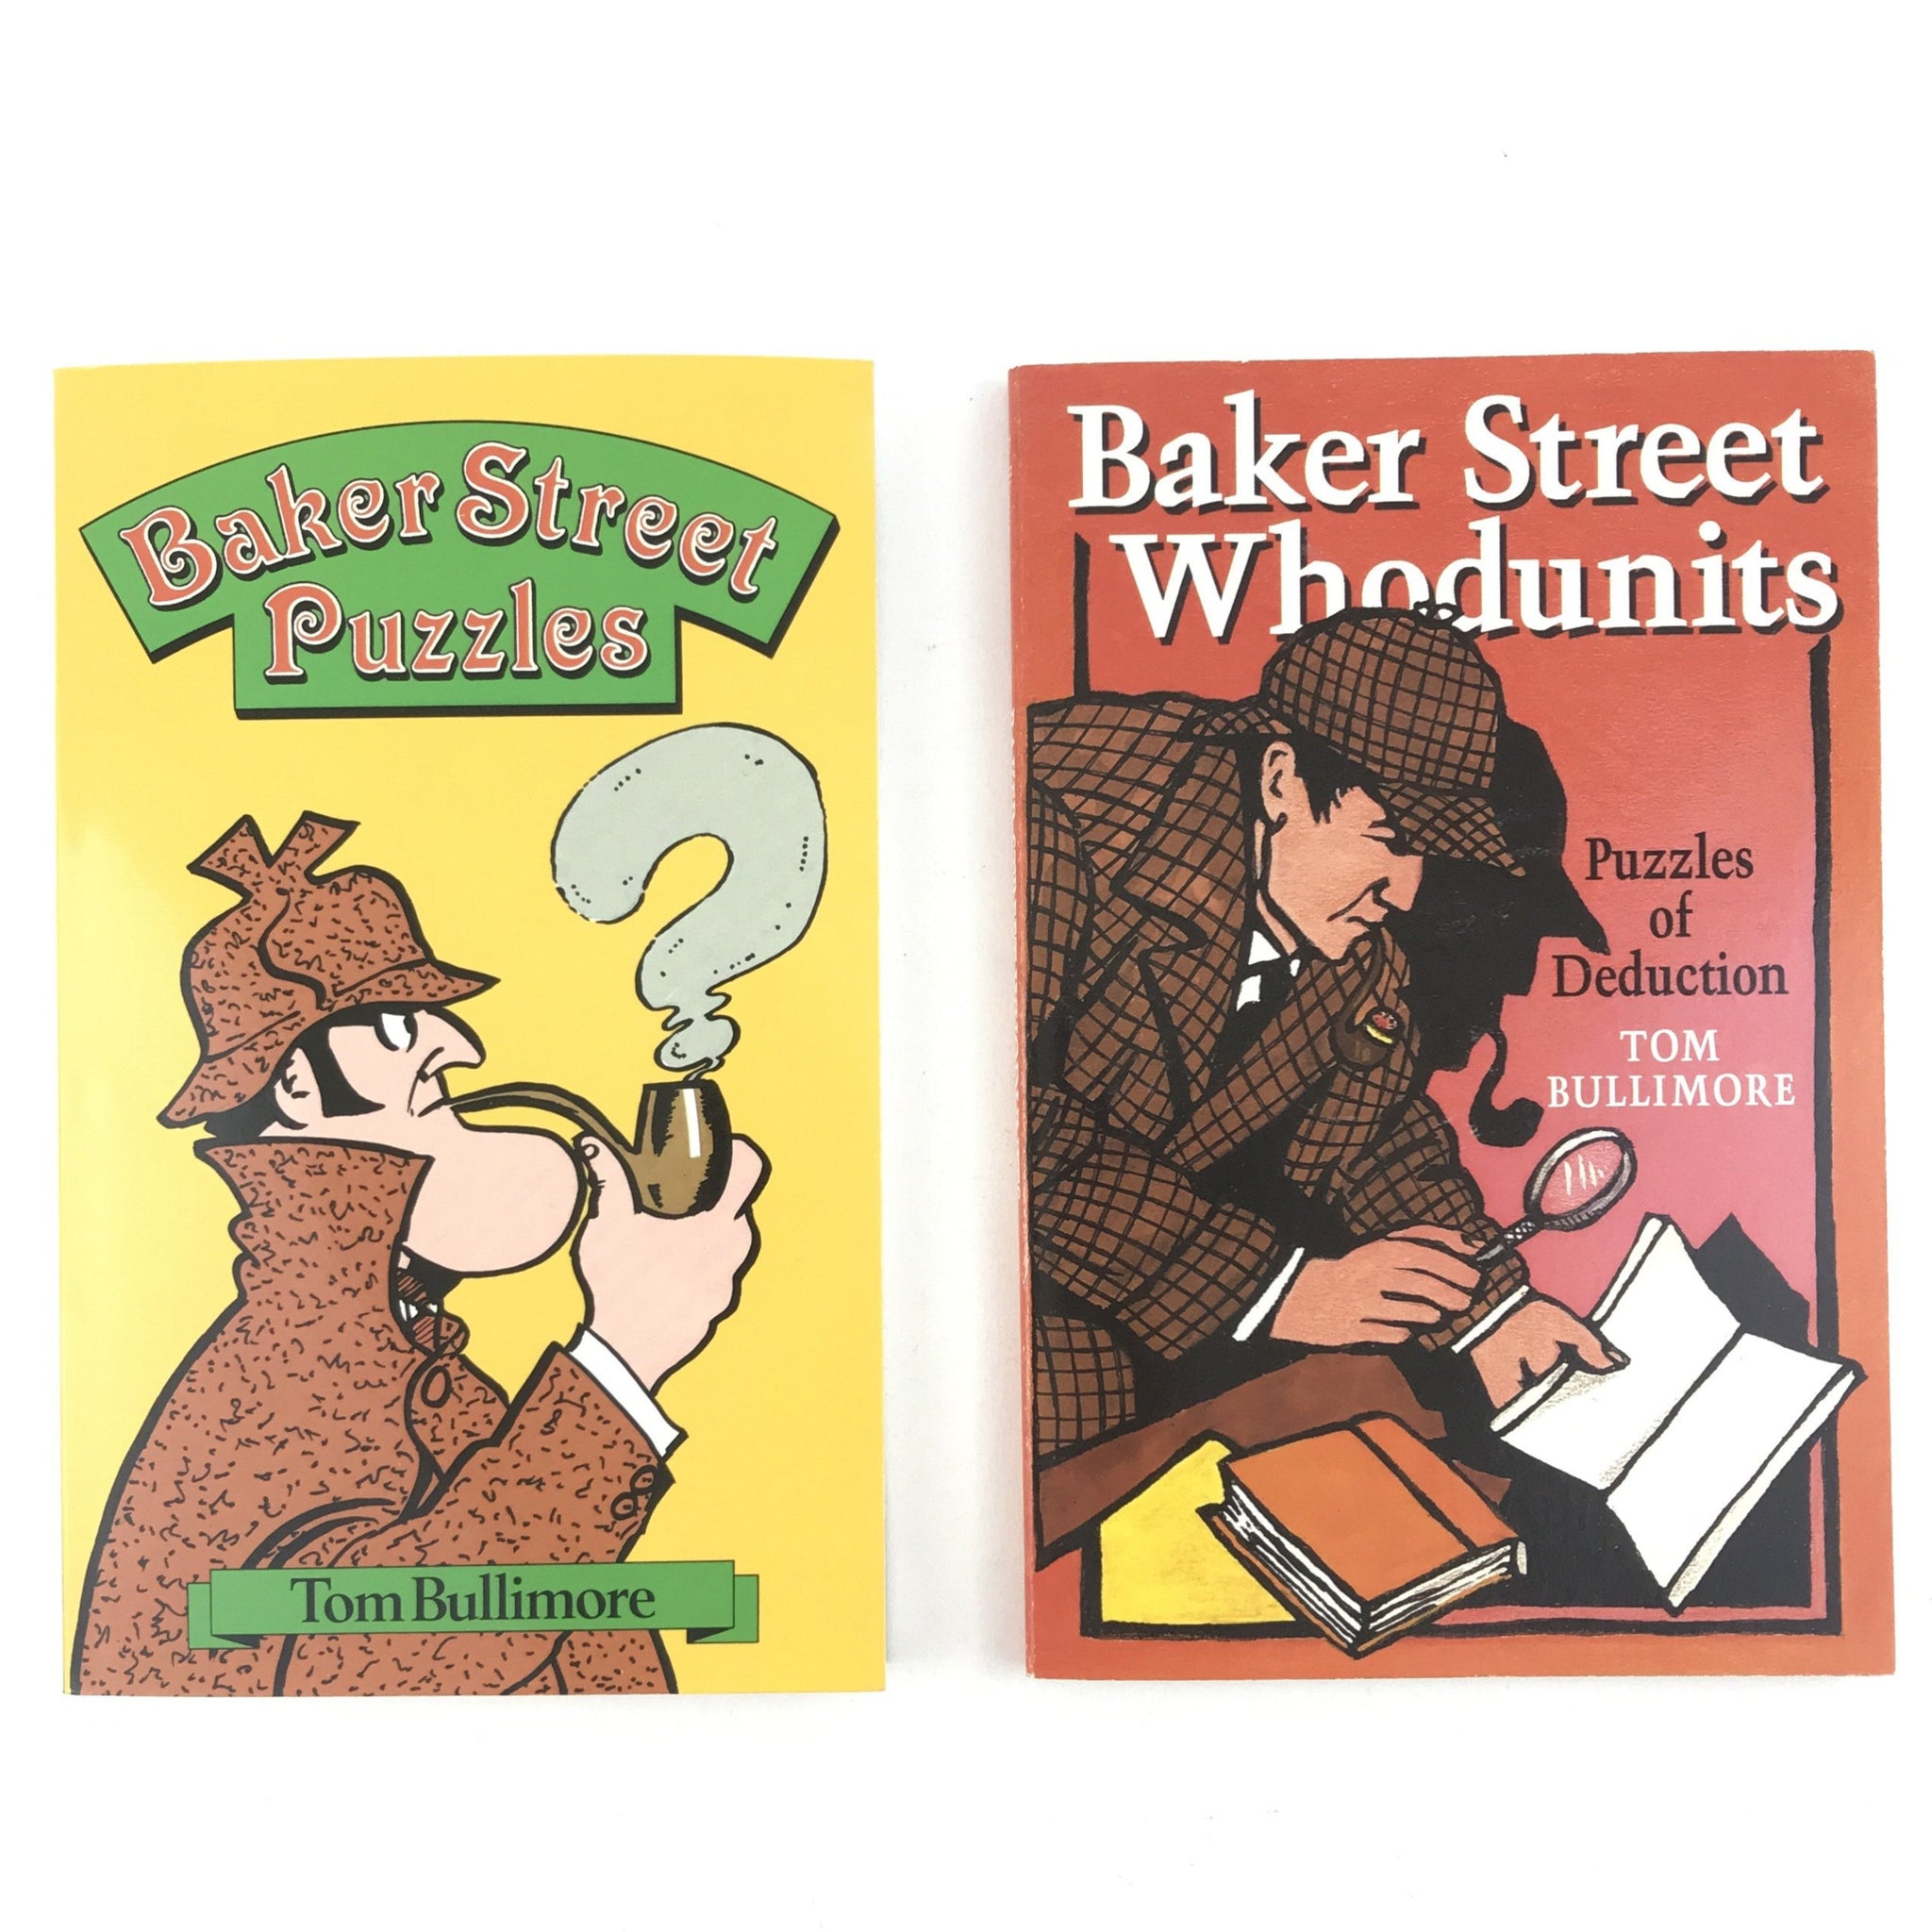 Baker Street Puzzles And Whodunits by Tom Bullimore - Lot of 2